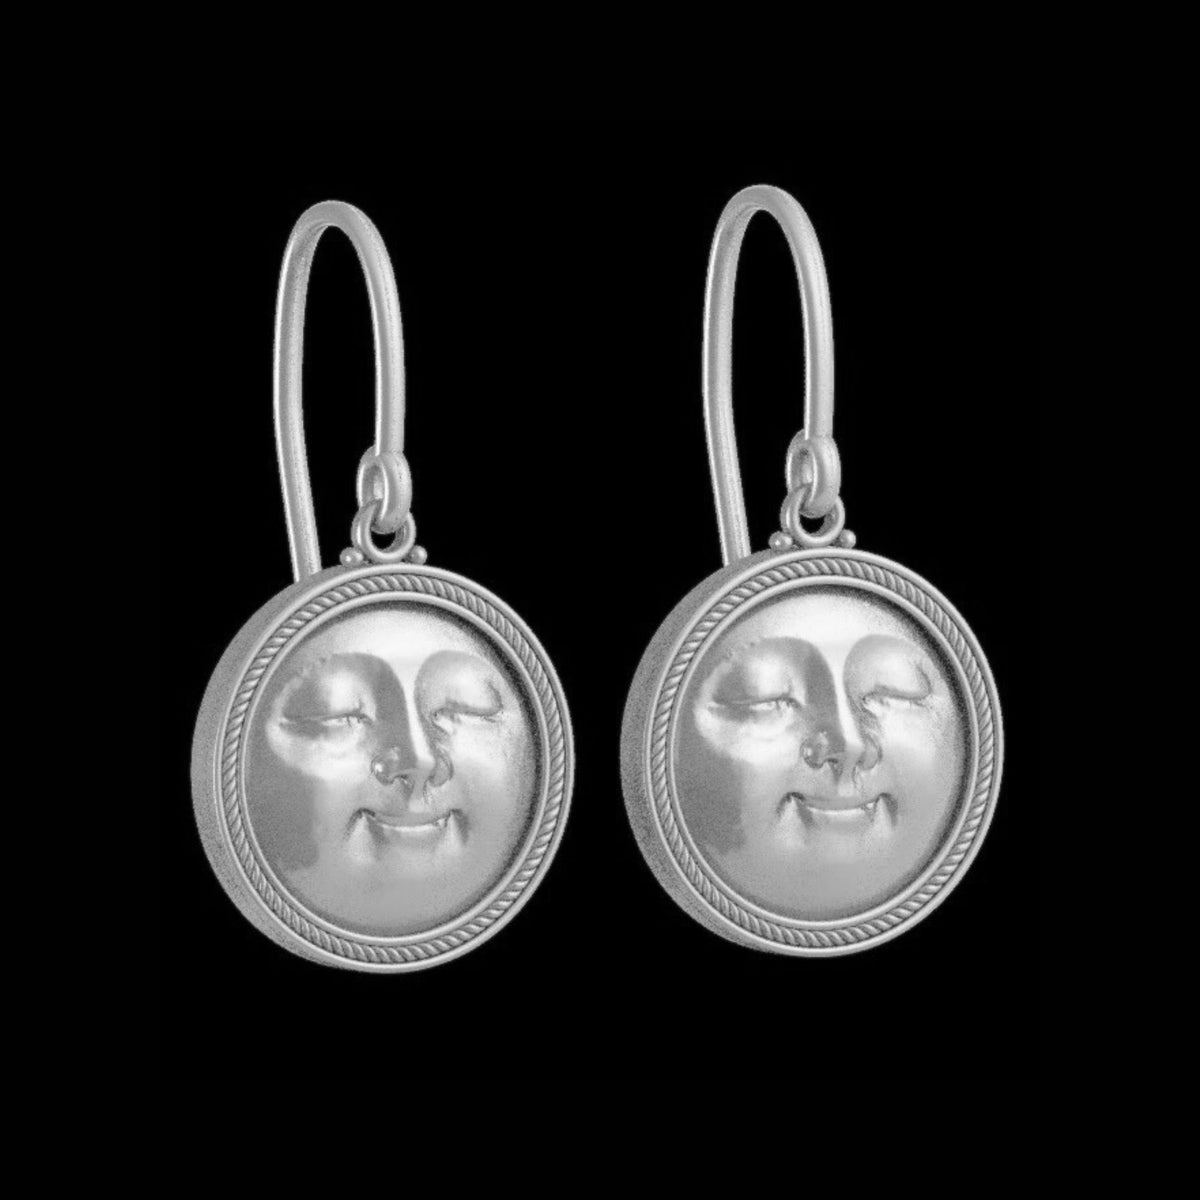 TRANQUILITY HAPPY MOON FACE EARRINGS